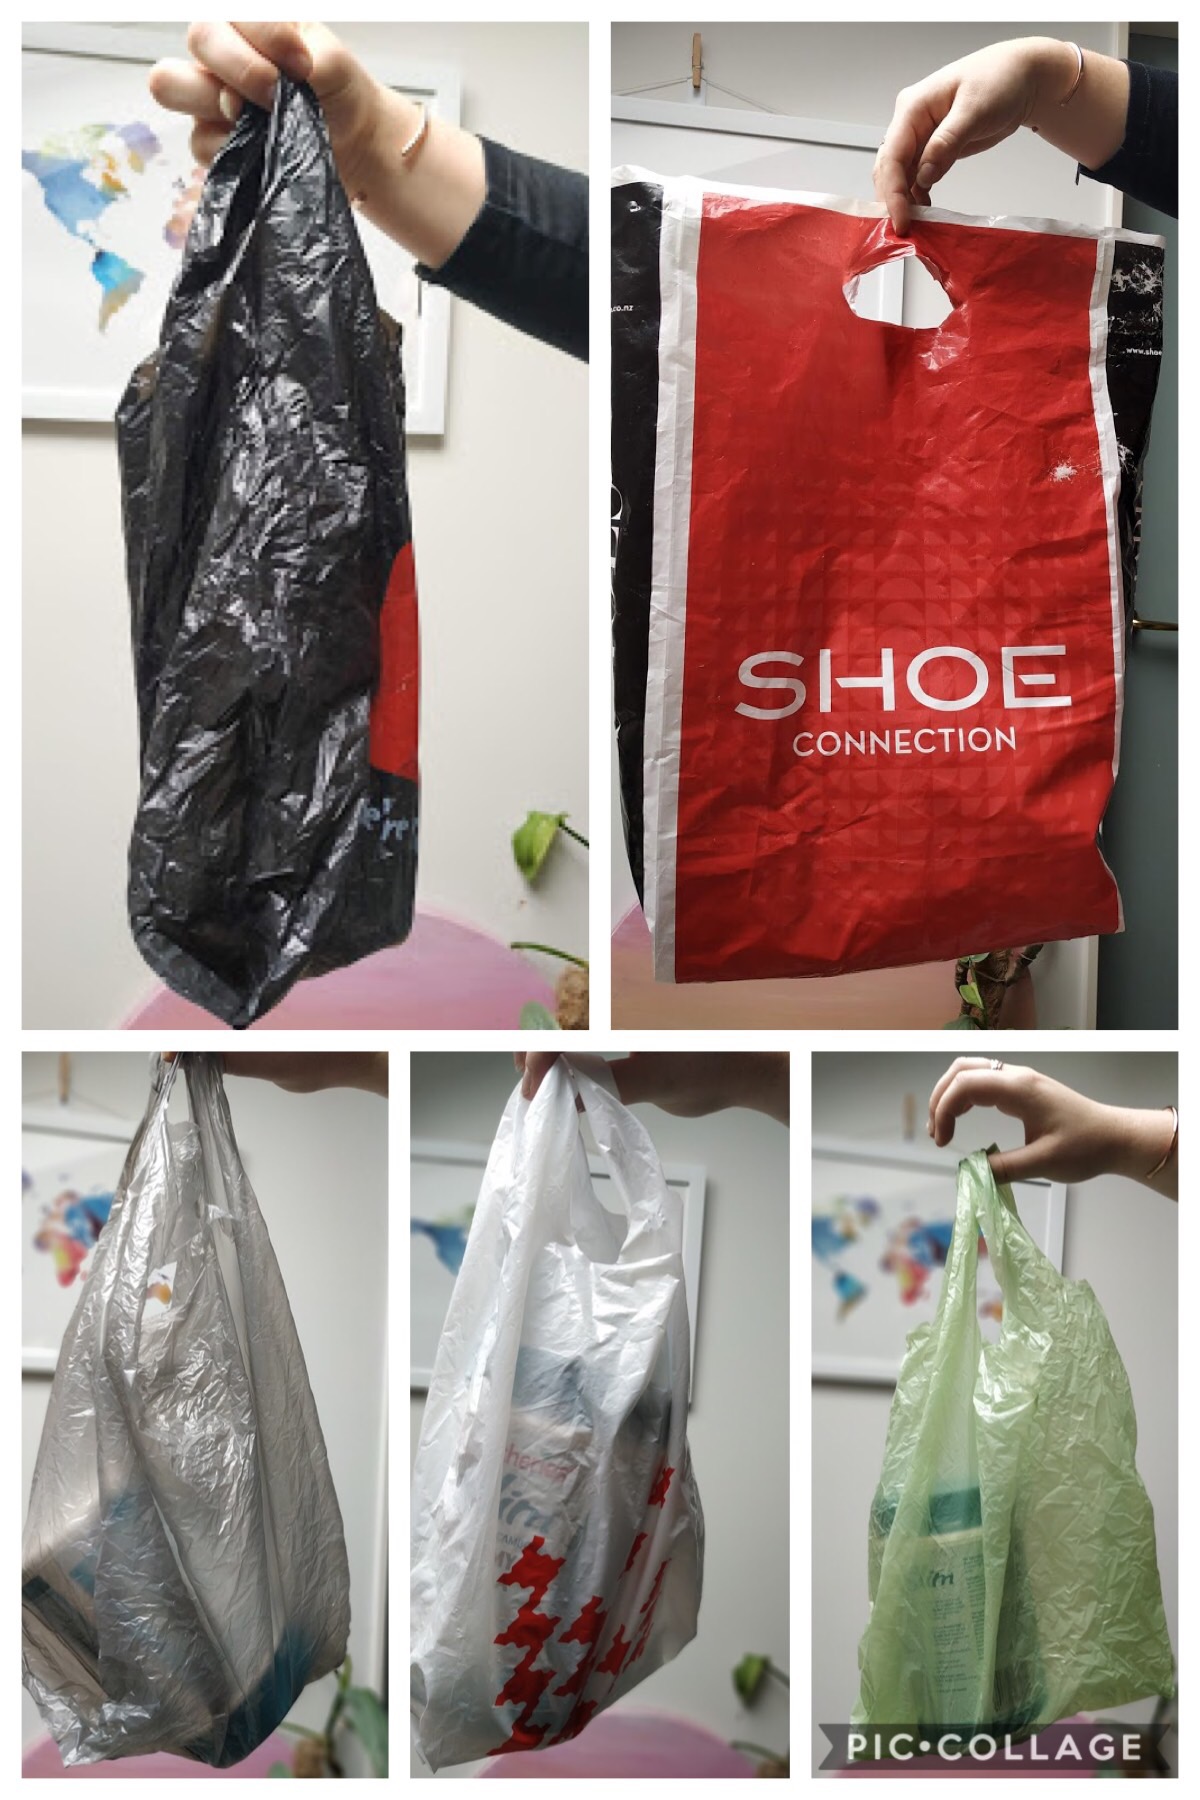 Single-use plastic shopping bags under 70 microns in thickness will be phased out in New Zealand on 1 July 2019 when regulations come into force.